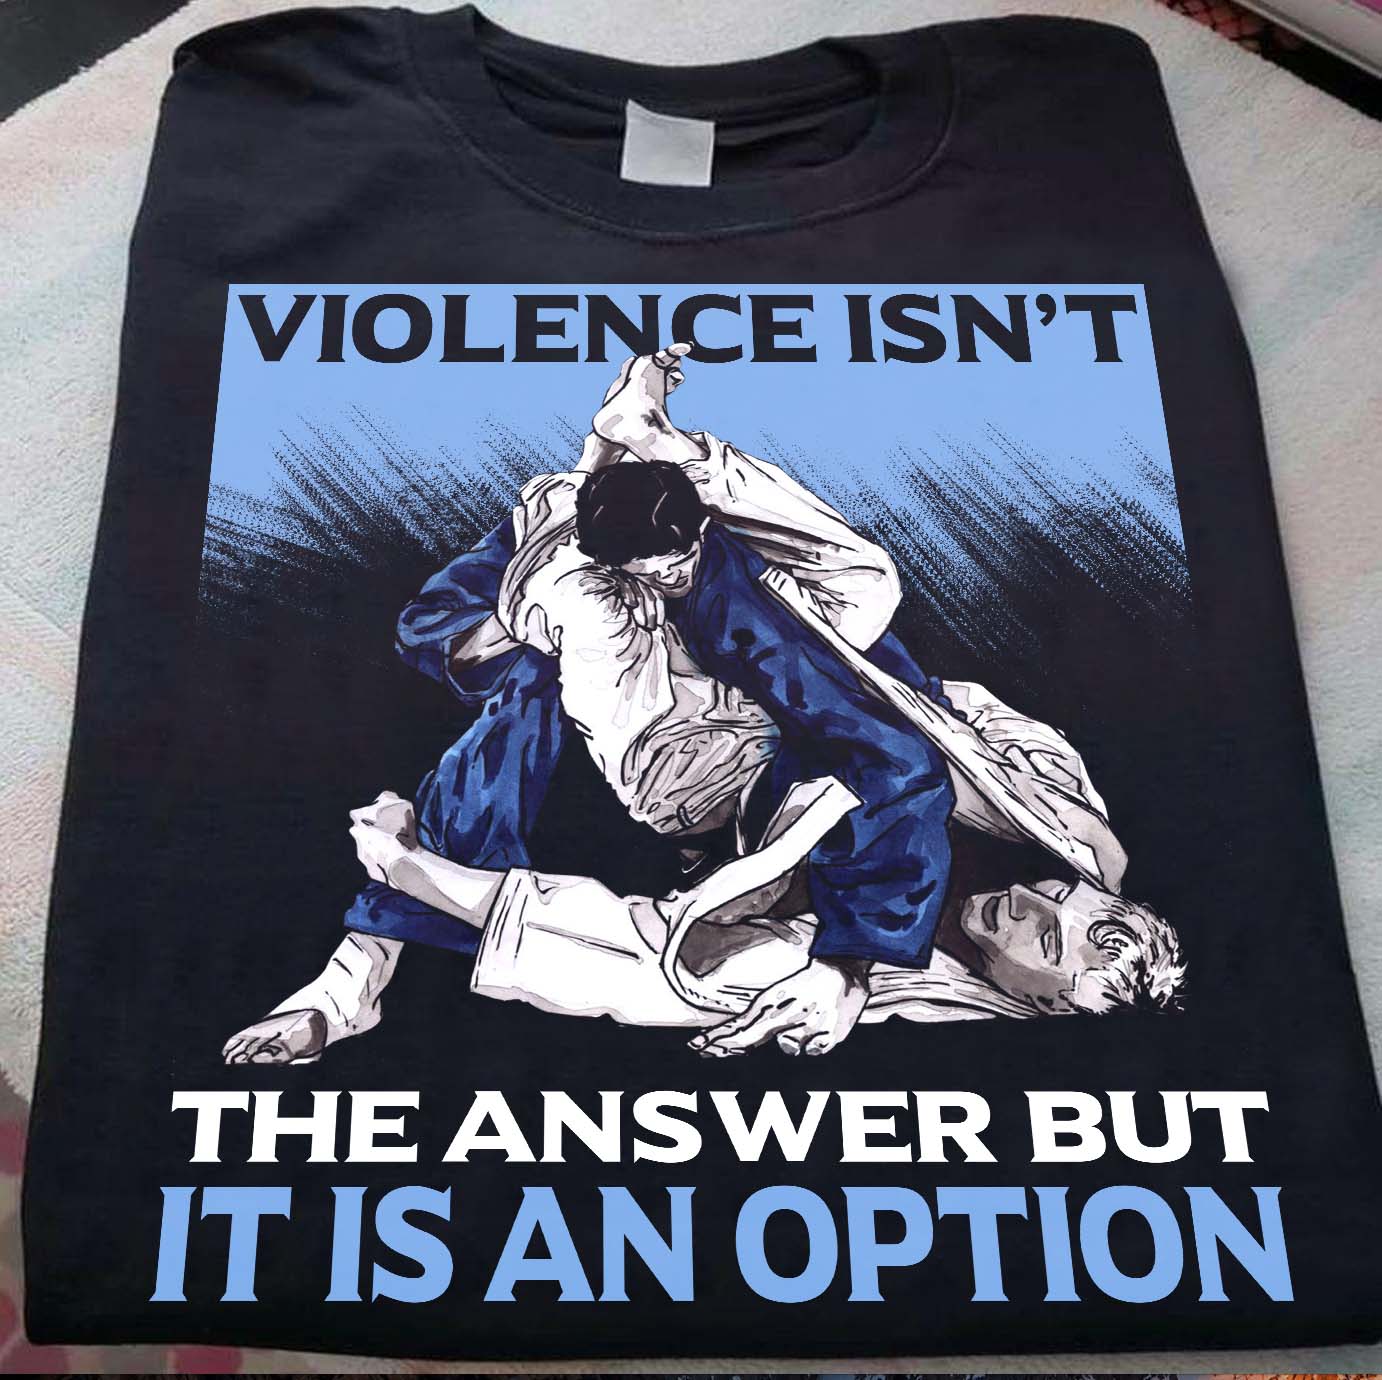 Violence isn't the answer but it is an option